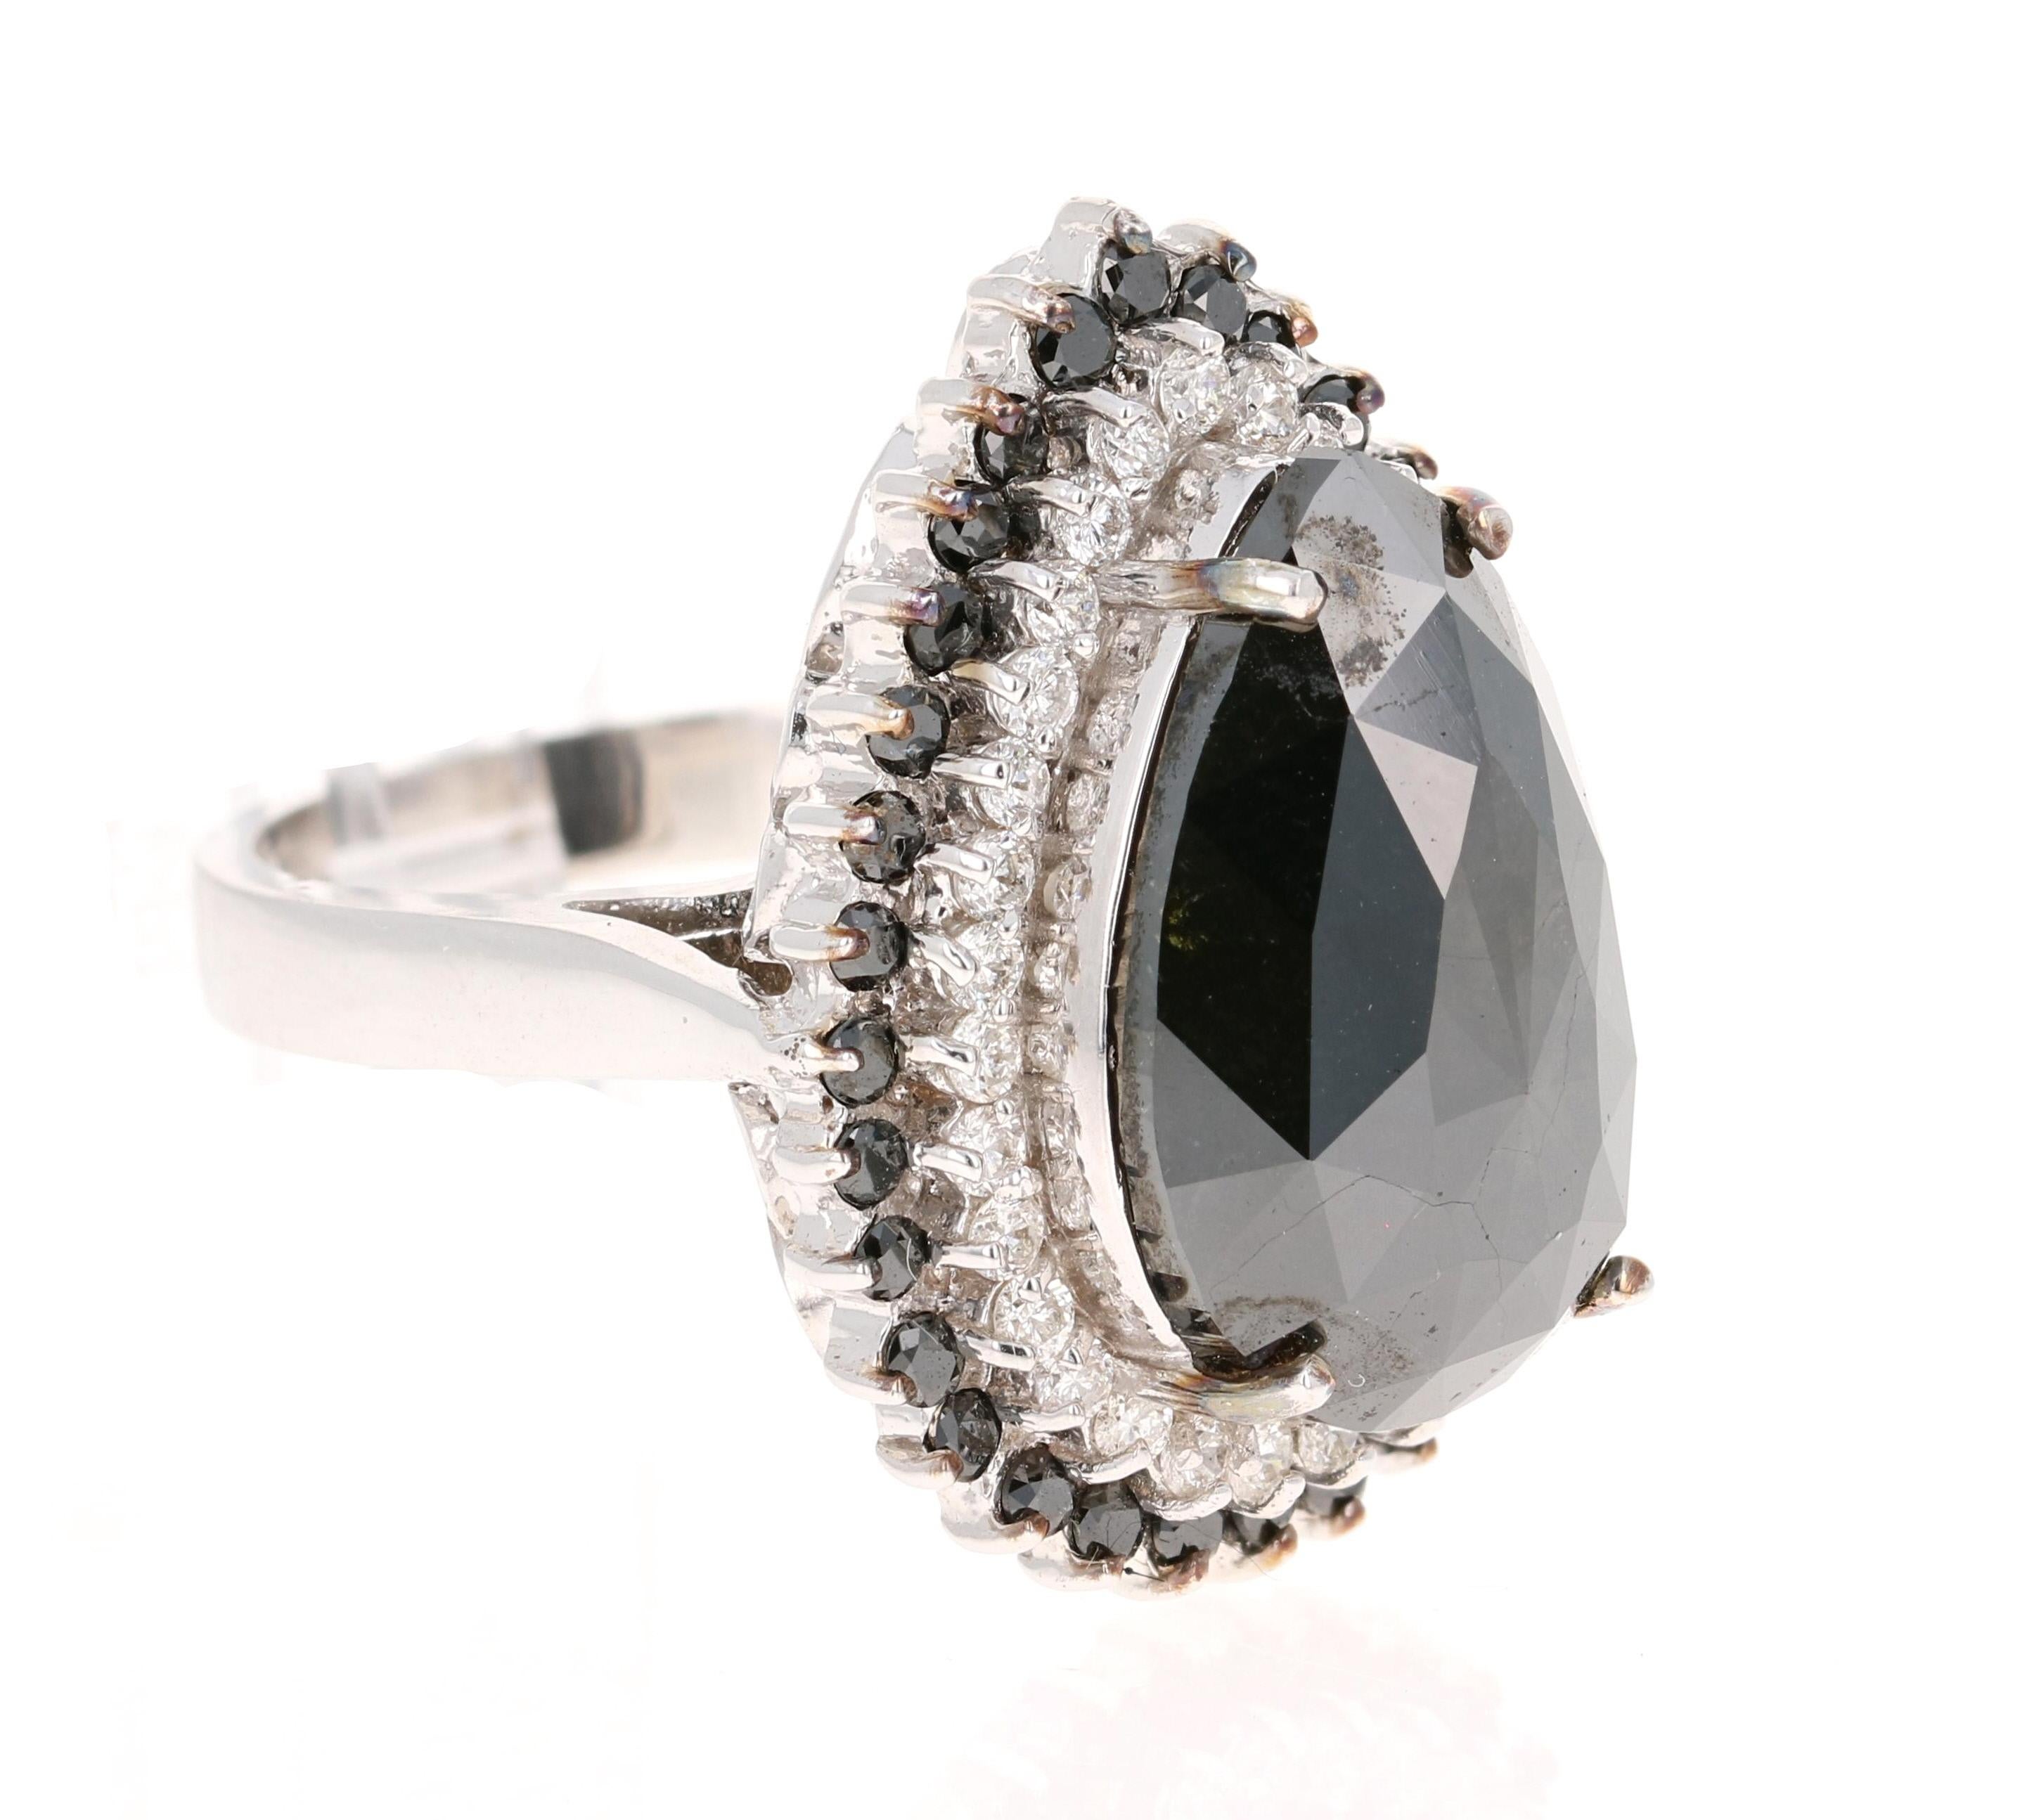 This Black and White Diamond Cocktail Ring is simply a Stunning Beauty! 

The Pear Cut Black Diamond is 9.92 Carats and is surrounded by a halo of 31  Round Cut Diamonds weighing 0.68 Carats (Clarity: SI, Color: F). Additionally it has 32 Black